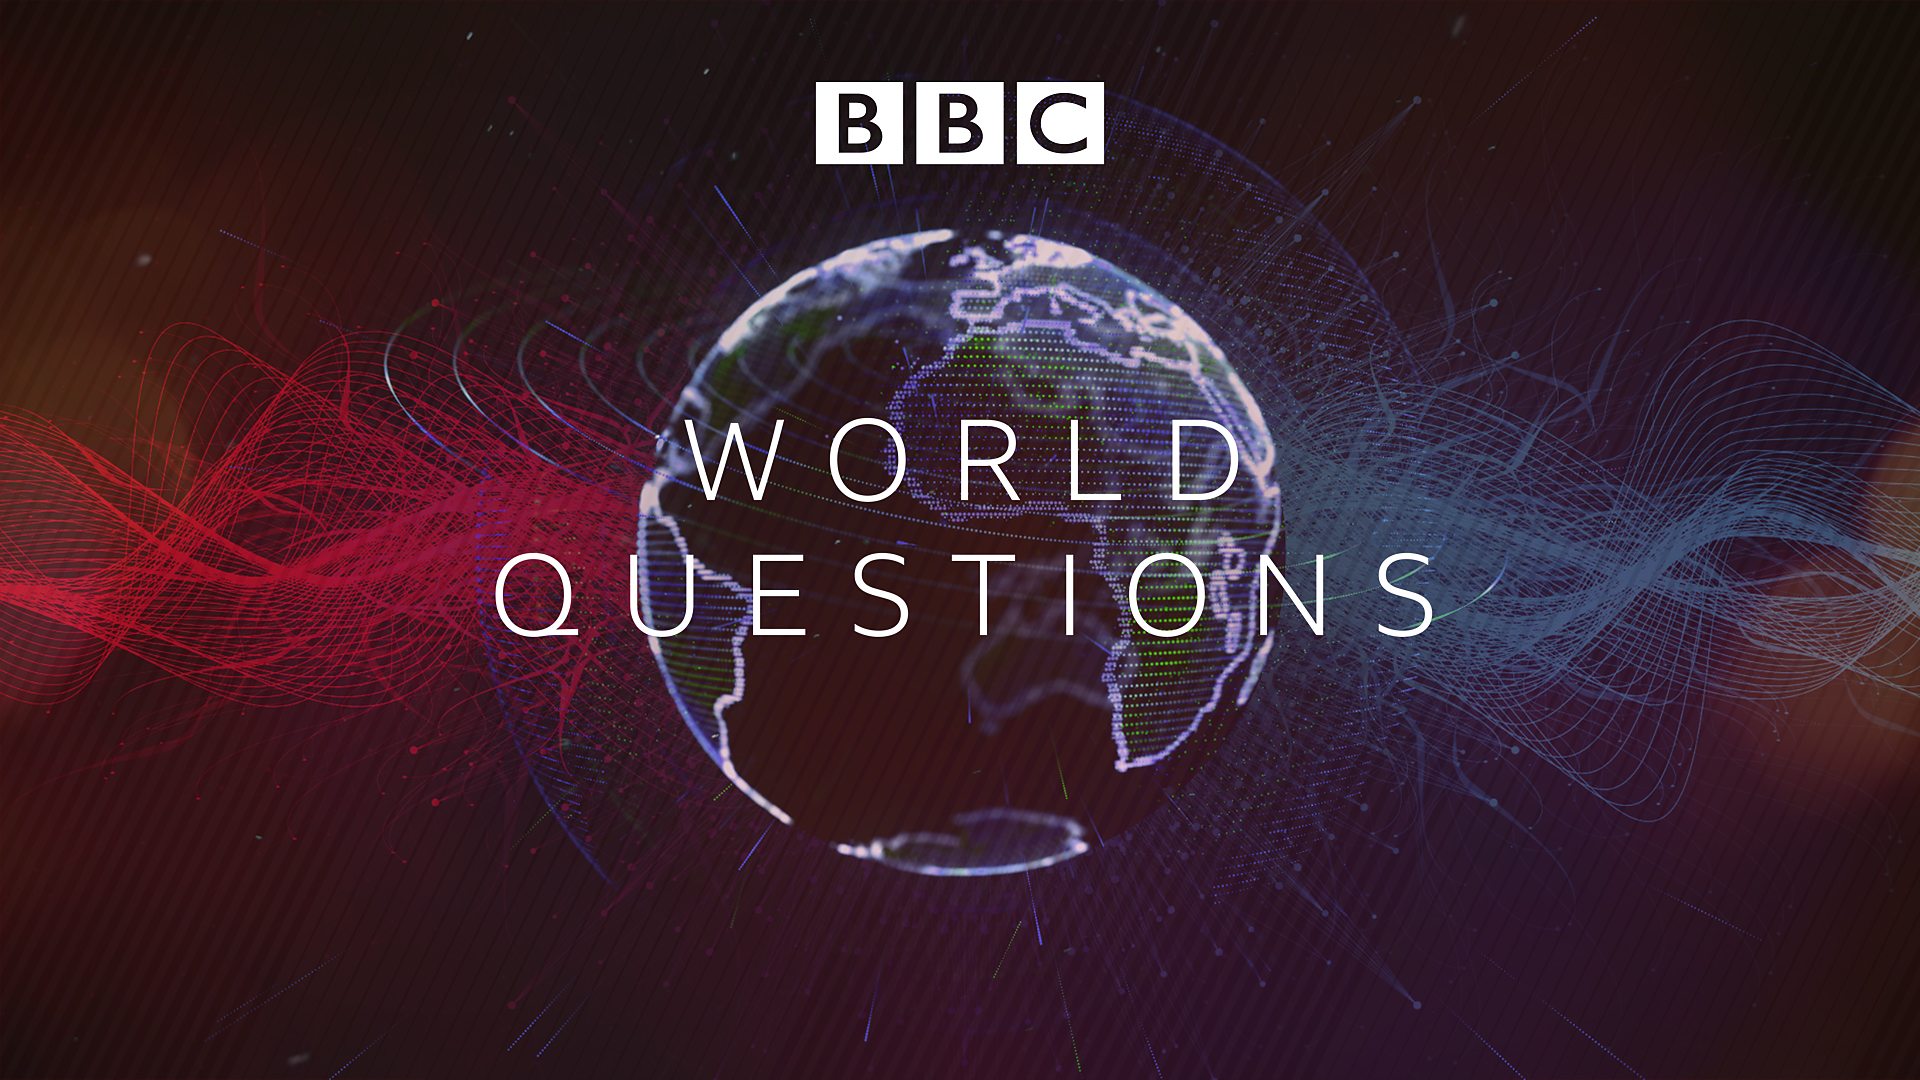 Michigan to Host BBC World Questions Event